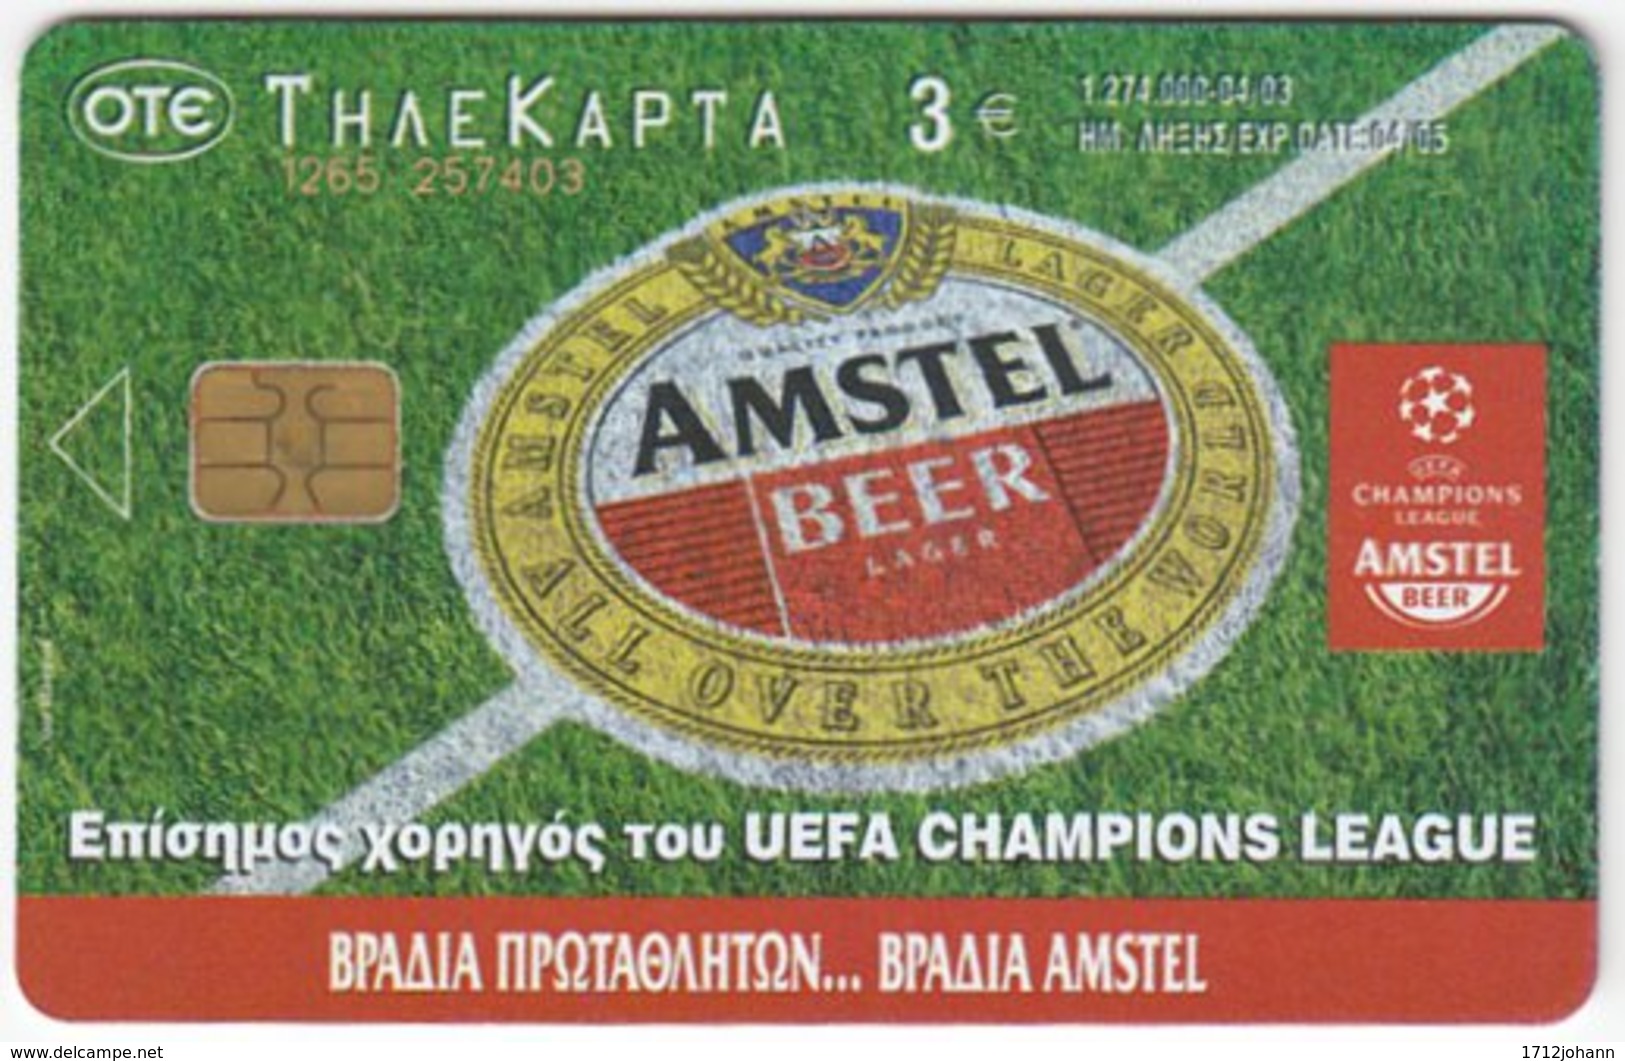 GREECE E-449 Chip OTE - Advertising, Drink, Beer, Amstel / Sport, Soccer - Used - Griechenland